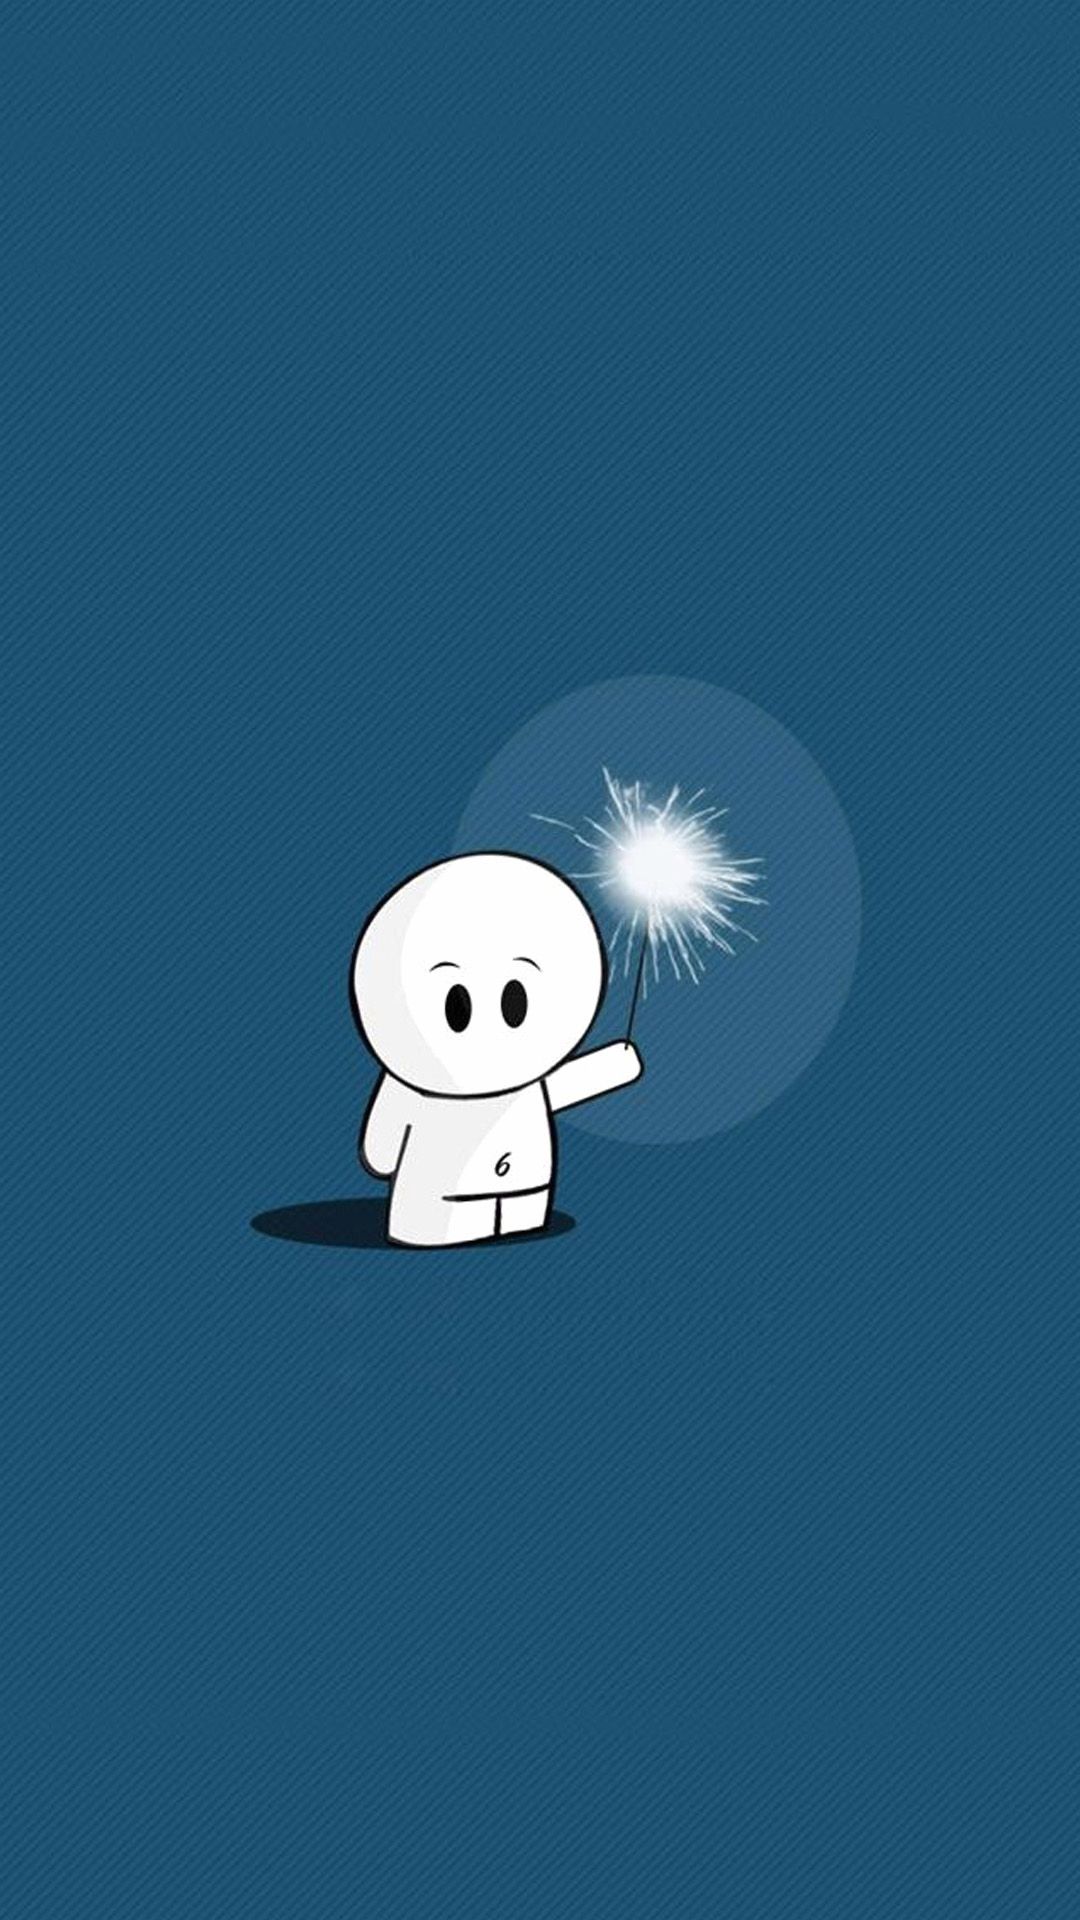 A cartoon character holding up sparklers in the dark - Happy, New Year